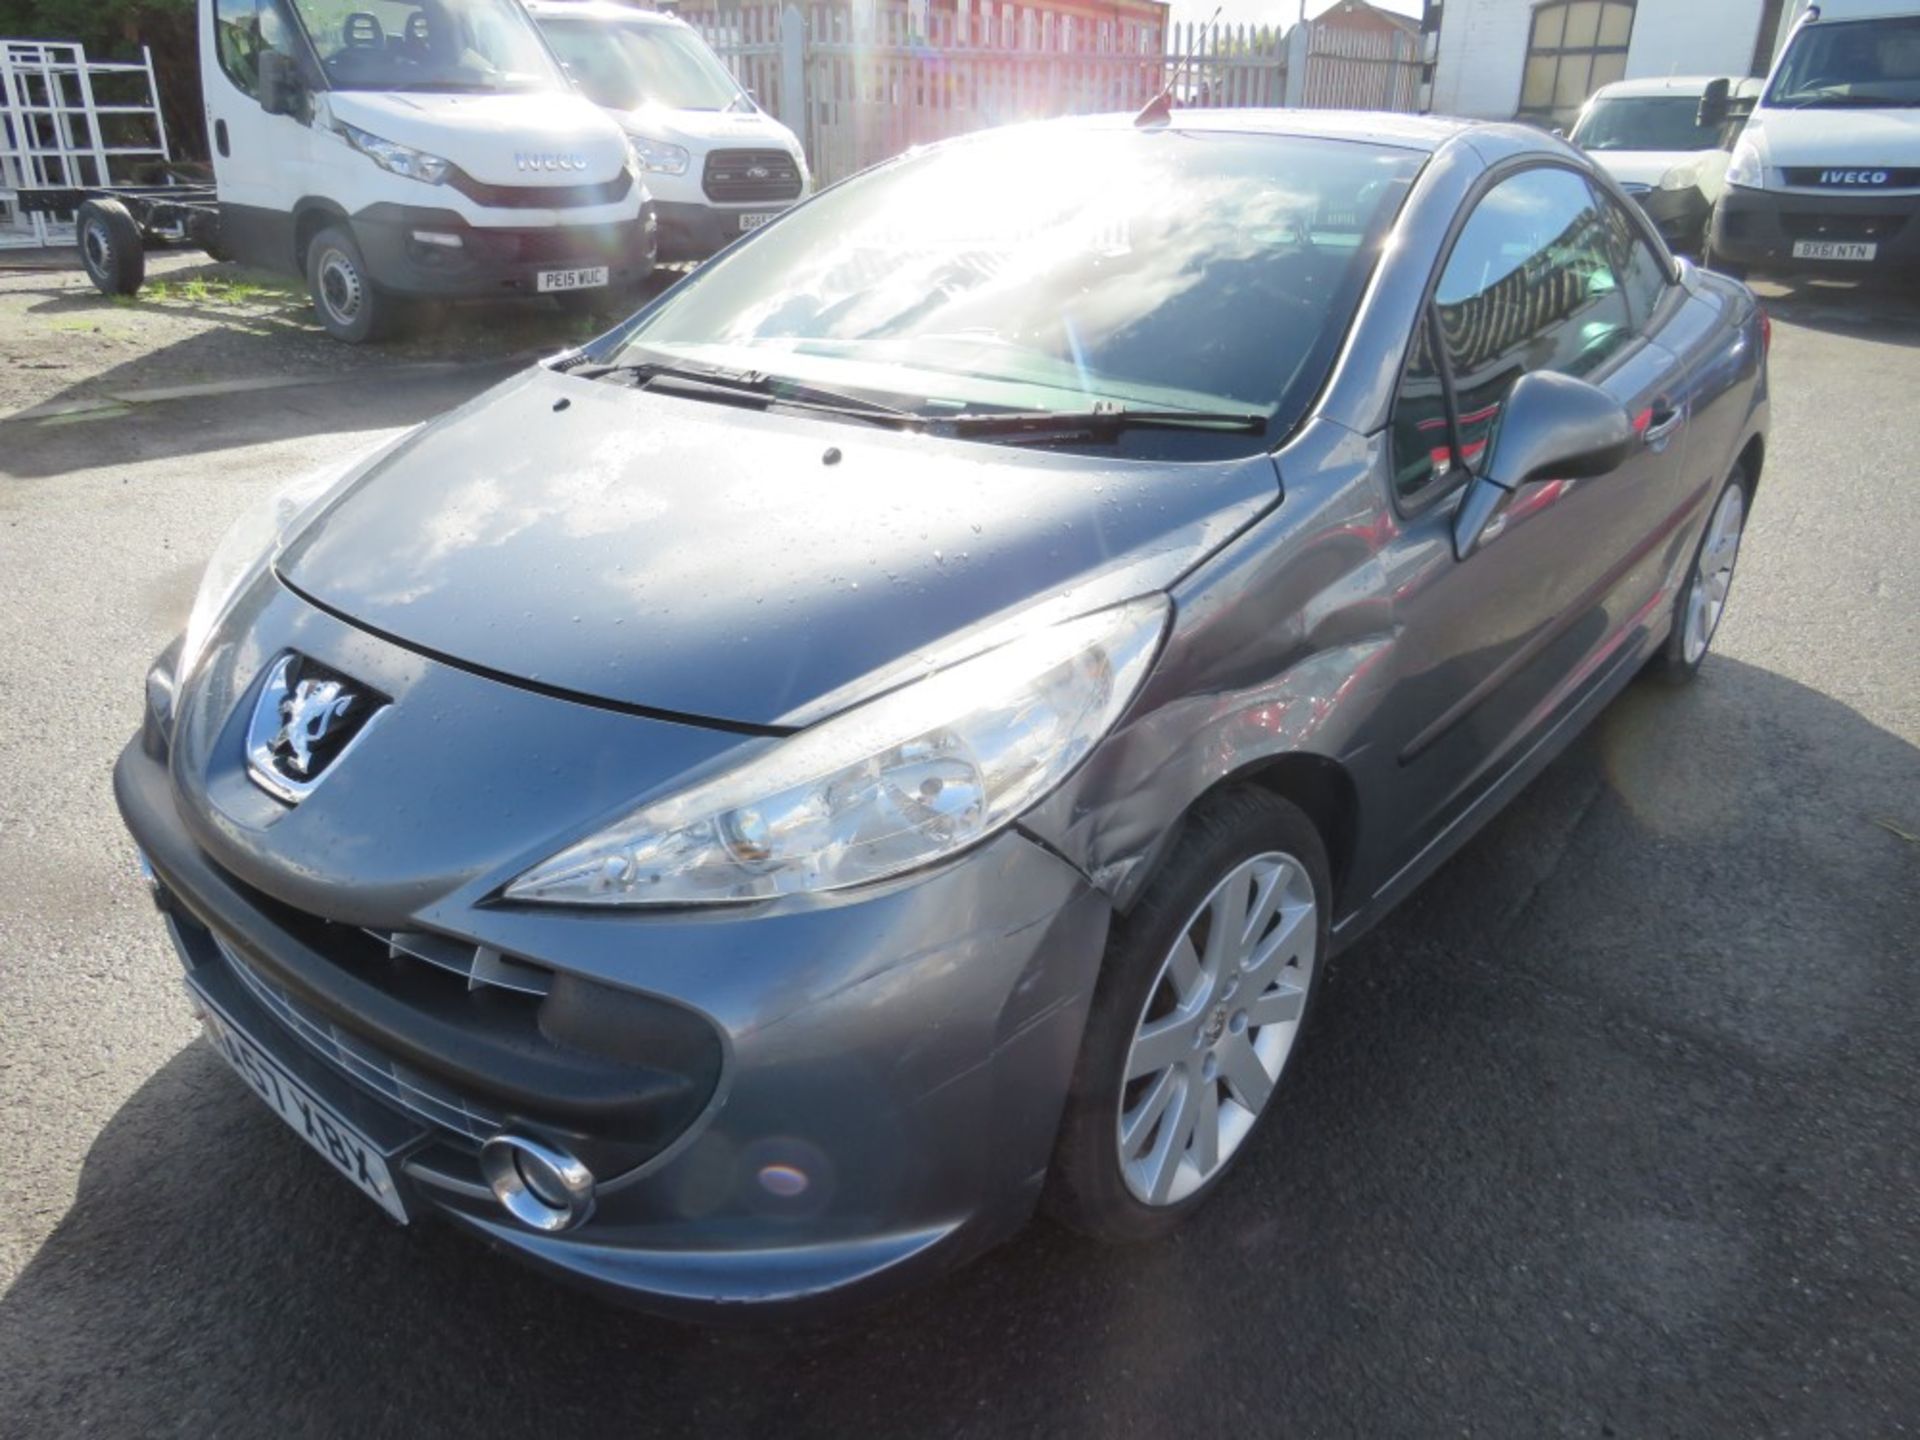 57 reg PEUGEOT 207 GT CC COUPE, 1ST REG 09/07, 113107M NOT WARRANTED, V5 HERE, 5 FORMER KEEPERS [ - Image 2 of 6